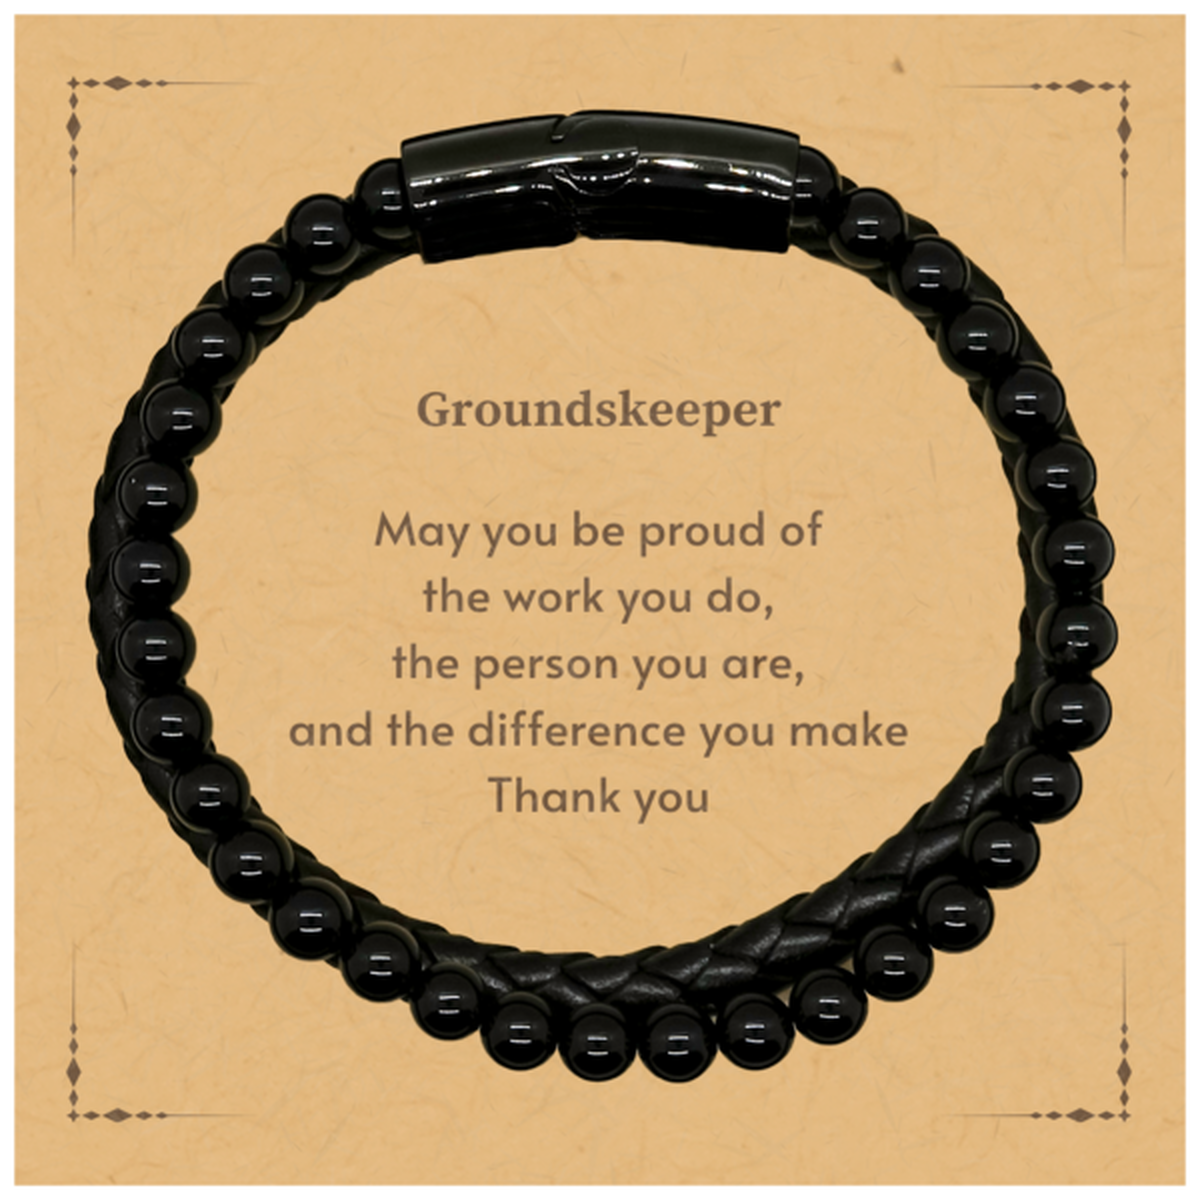 Heartwarming Stone Leather Bracelets Retirement Coworkers Gifts for Groundskeeper, Groundskeeper May You be proud of the work you do, the person you are Gifts for Boss Men Women Friends